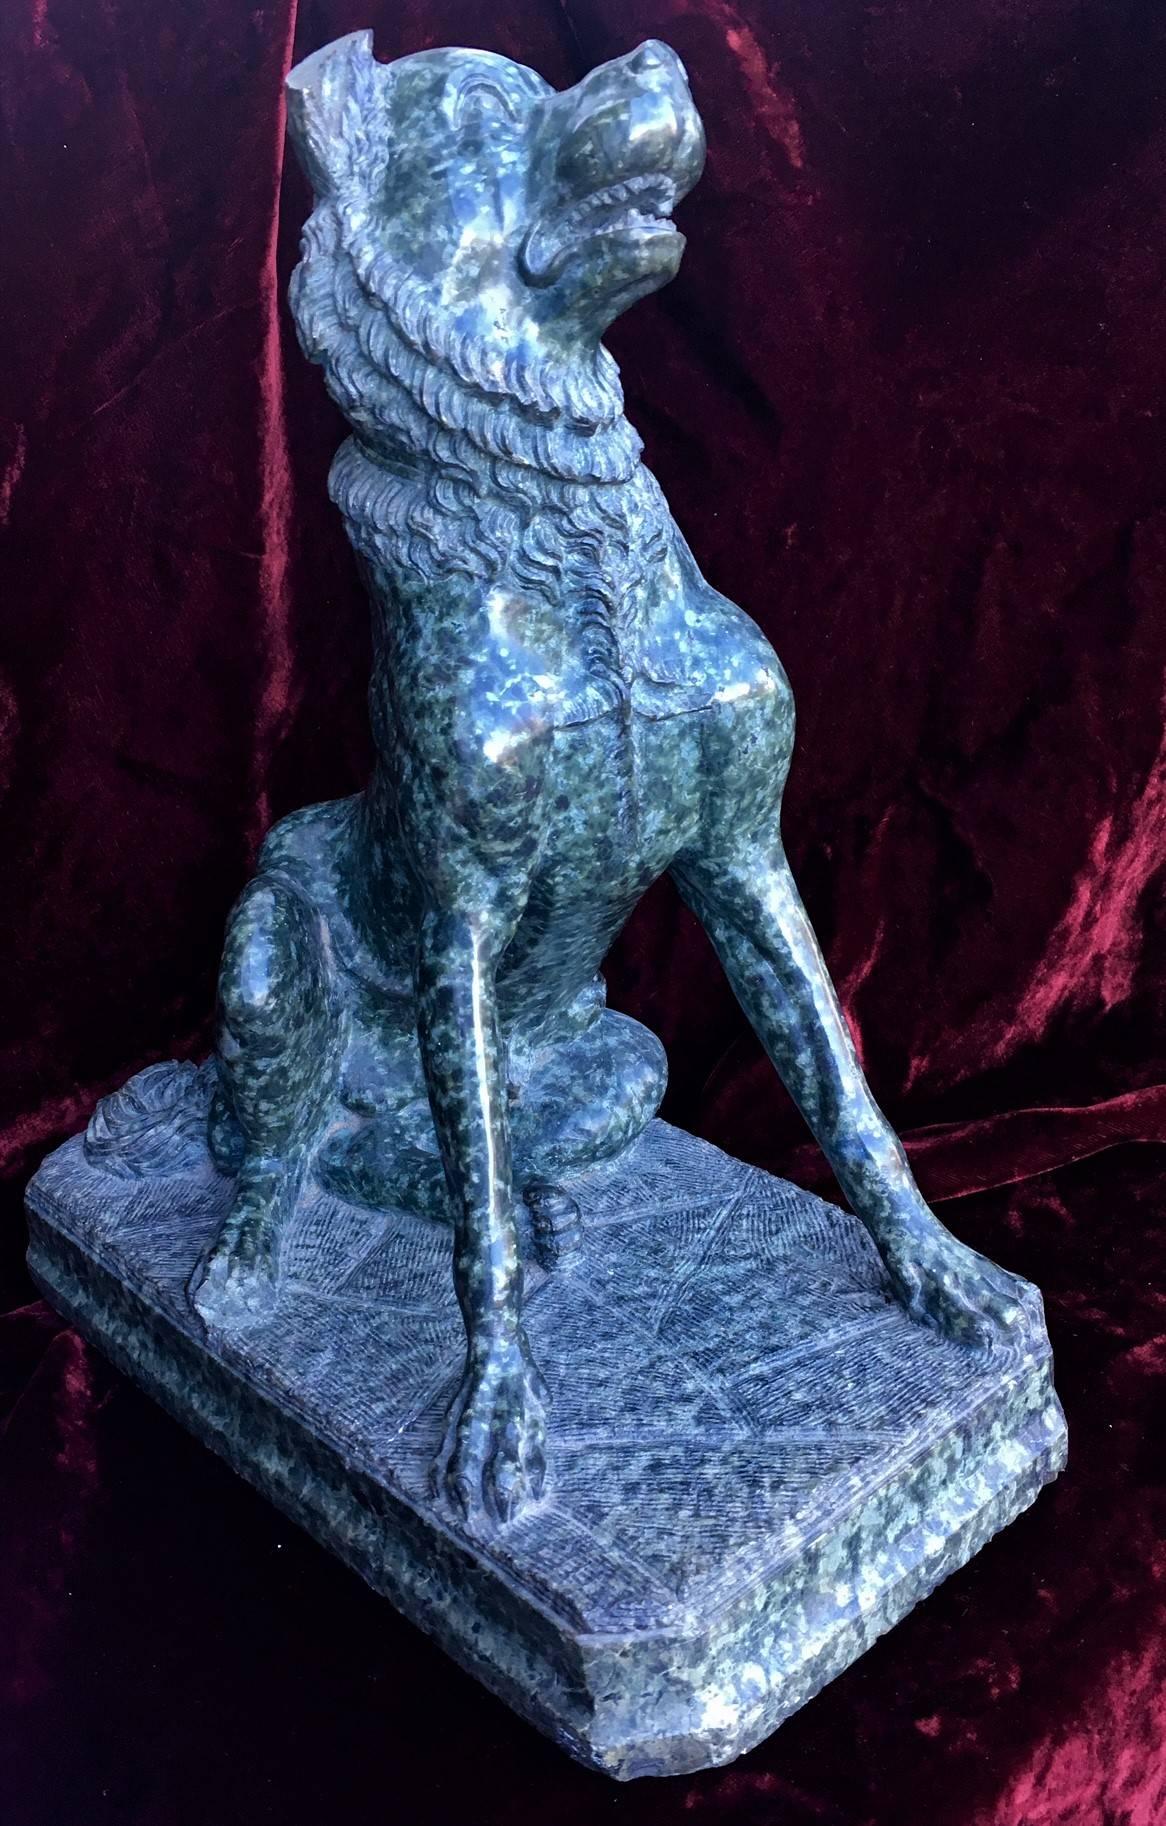 
The antique sculpture portrays a mastiff, sitting upright in an attentive pose with ears cocked, head canted, and mouth open. Hand carved from a block of green marble, unsigned. The sculpture is an exact copy in miniature of one of a pair of such